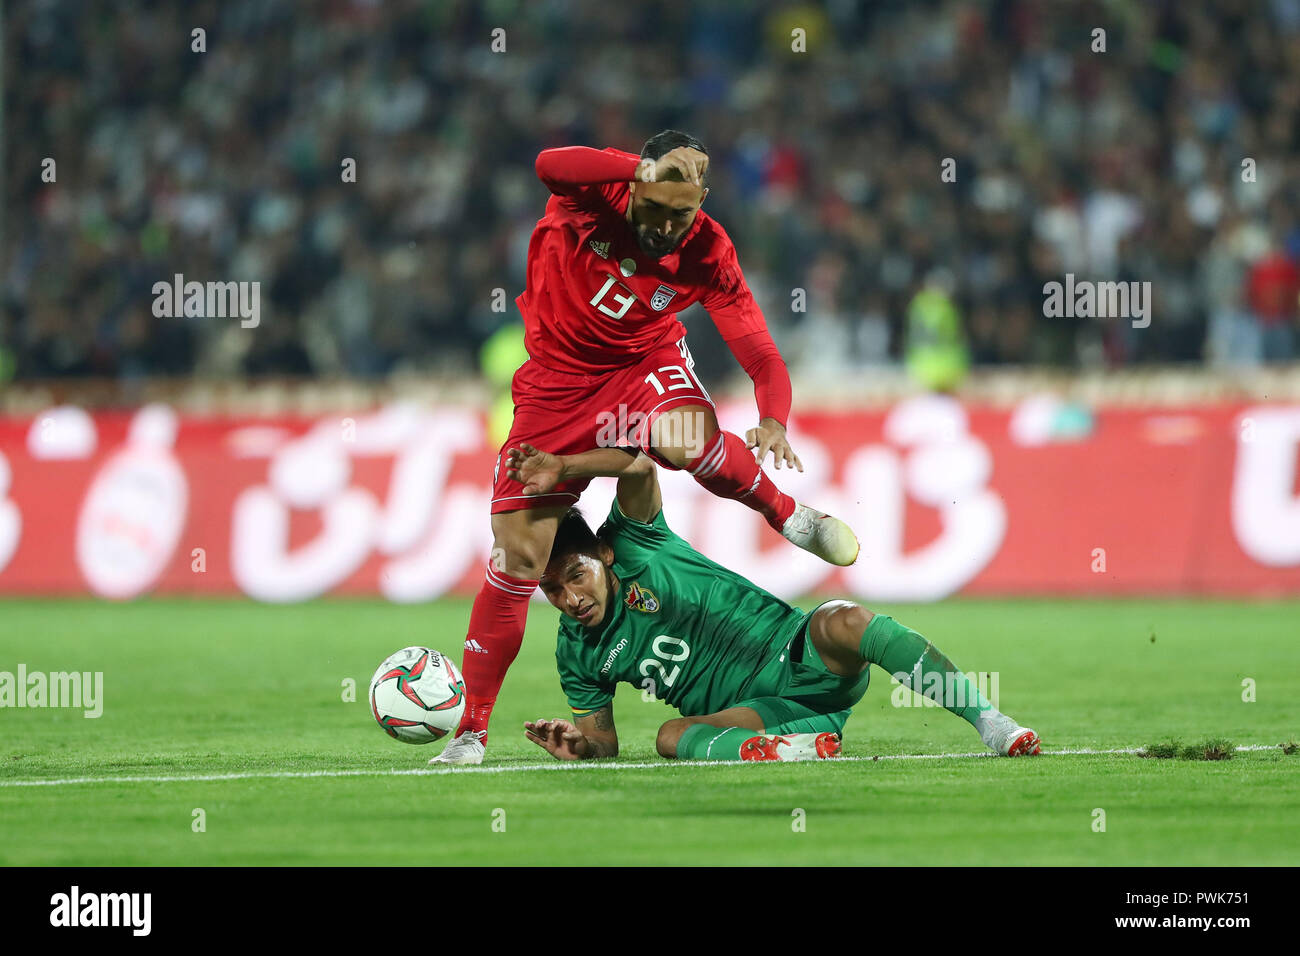 Tehran, Iran. 16th Oct, 2018. Iran's Saman Ghoddos and Bolivia's Rudy Cardozo battle for the ball during an International Friendly soccer match between Iran and Bolivia at the Azadi Stadium. The Iranian authorities have allowed women to attend the match after a request from the Football Federation of the Islamic Republic of Iran. Credit: Saeid Zareian/dpa/Alamy Live News Stock Photo